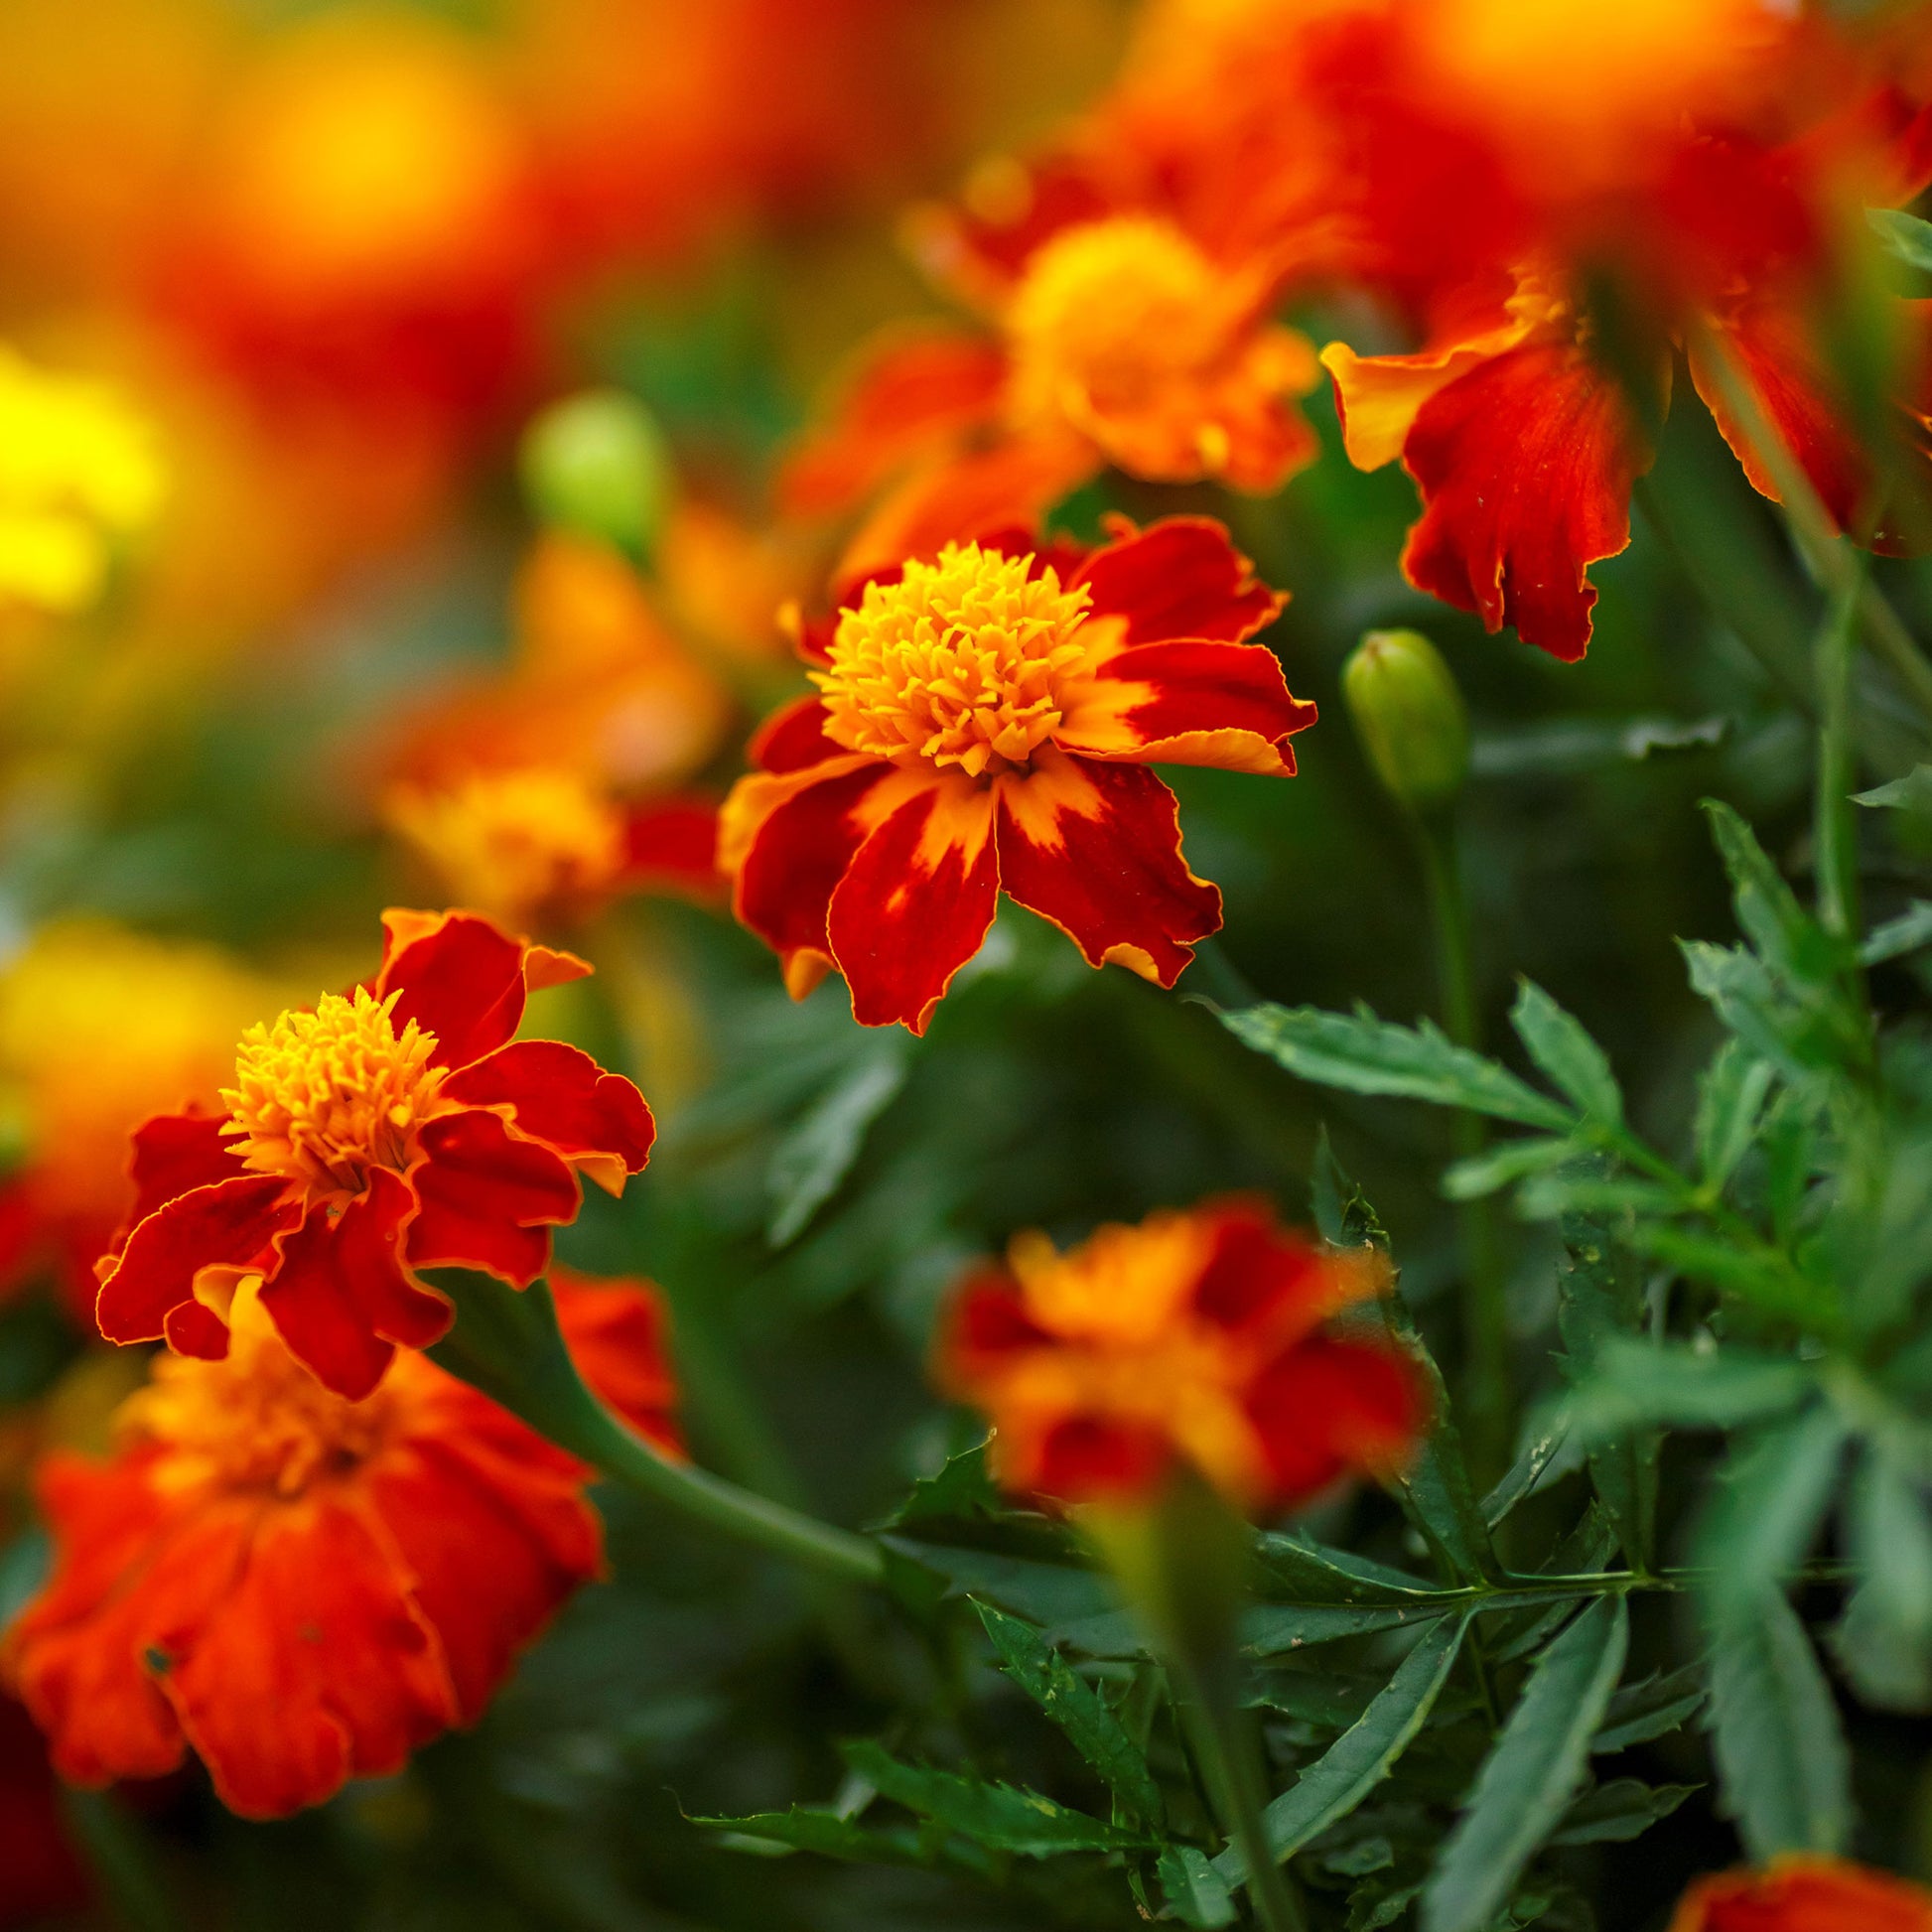 French Marigold Seeds - Orange Flame | Flower Seeds in Packets & Bulk ...